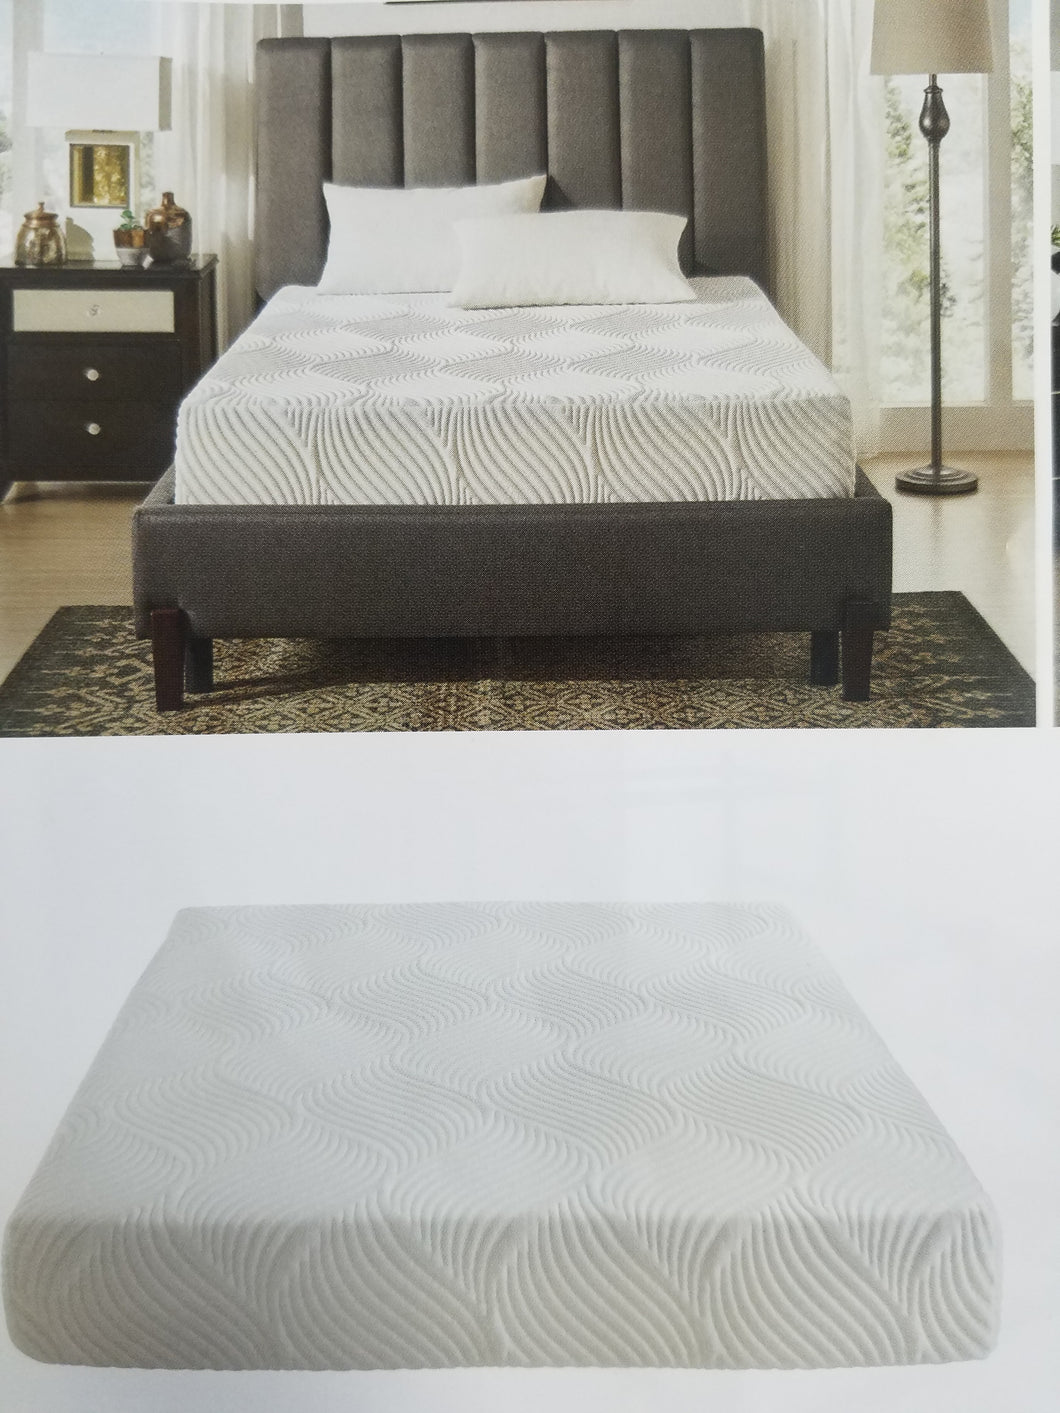 Gel-infused Memory Foam Mattress, medically tested, orthopedic, good for your body